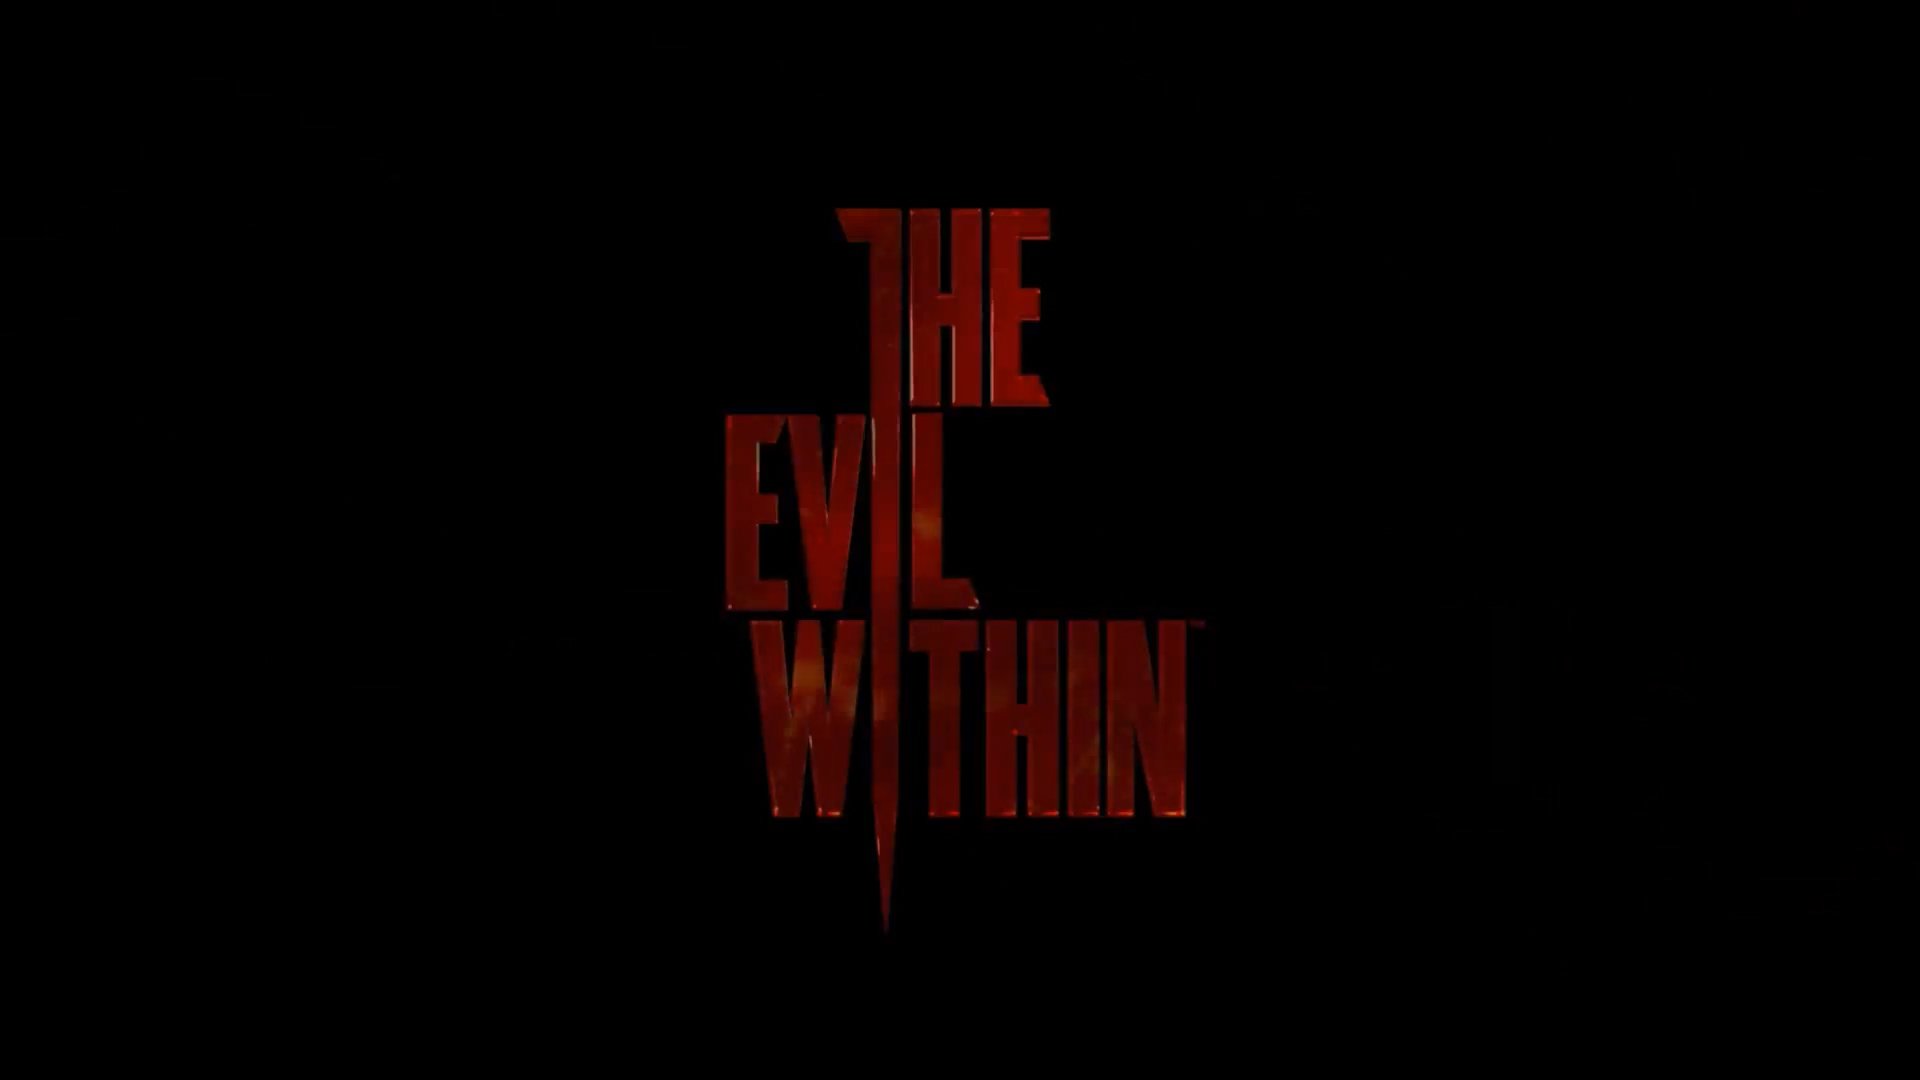 Wallpaper 26 Wallpaper From The Evil Within Gamepressurecom